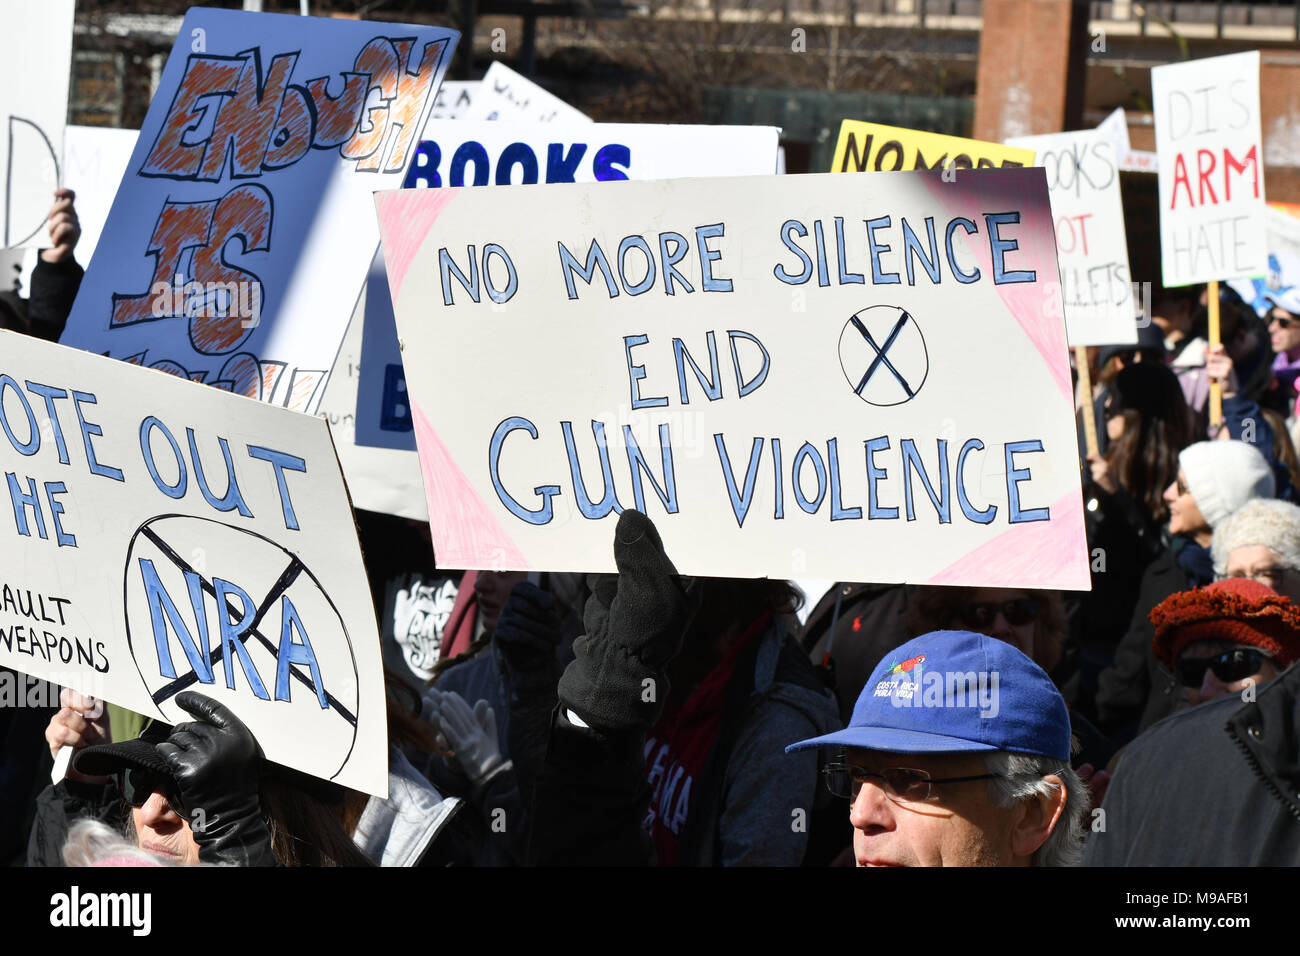 Philadelphia, Pennsylvania, USA. 24th Mar, 2018. Hundreds of Students and supporters gather at the Independence Mall in Philadelphia Pennsylvania to march against and protest school gun violence in the United States. Credit: Ricky Fitchett/ZUMA Wire/Alamy Live News Stock Photo